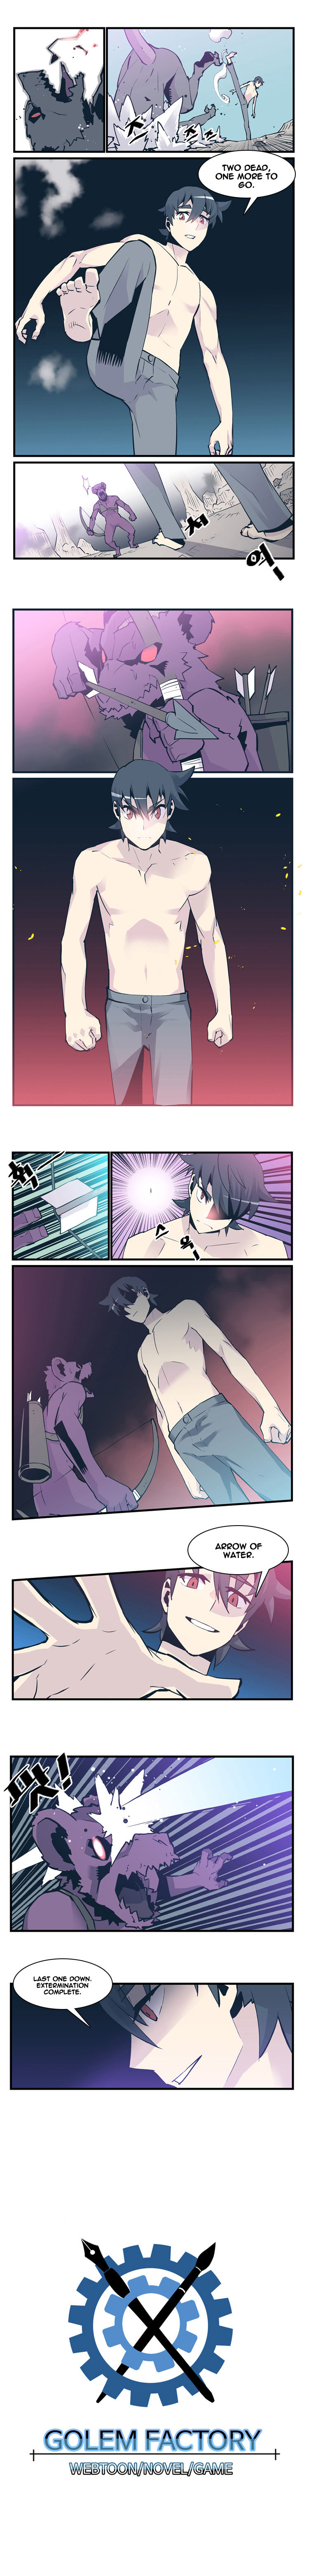 Maze Age Z Chapter 3 Page 6